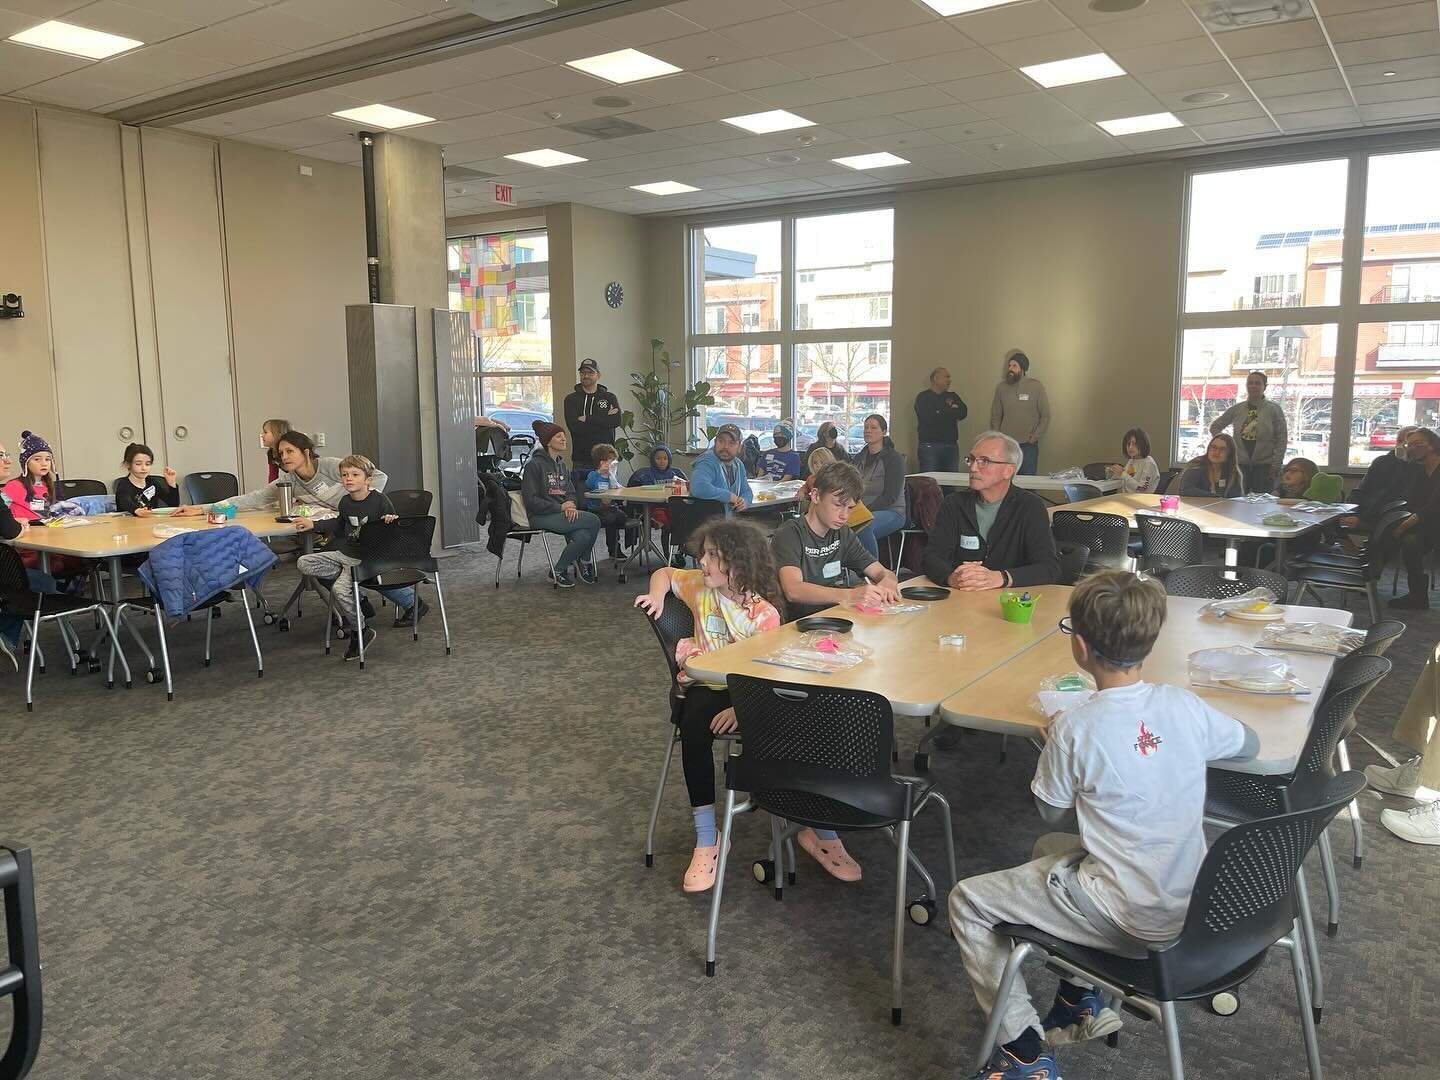 Stemforce Winter Break Spectacular:
We held an event at Sequoia Public Library with fun Winter themed stem activities!
50+ people joined us in learning about physics and basic circuits, and then building custom snowman- snowball launchers and light u